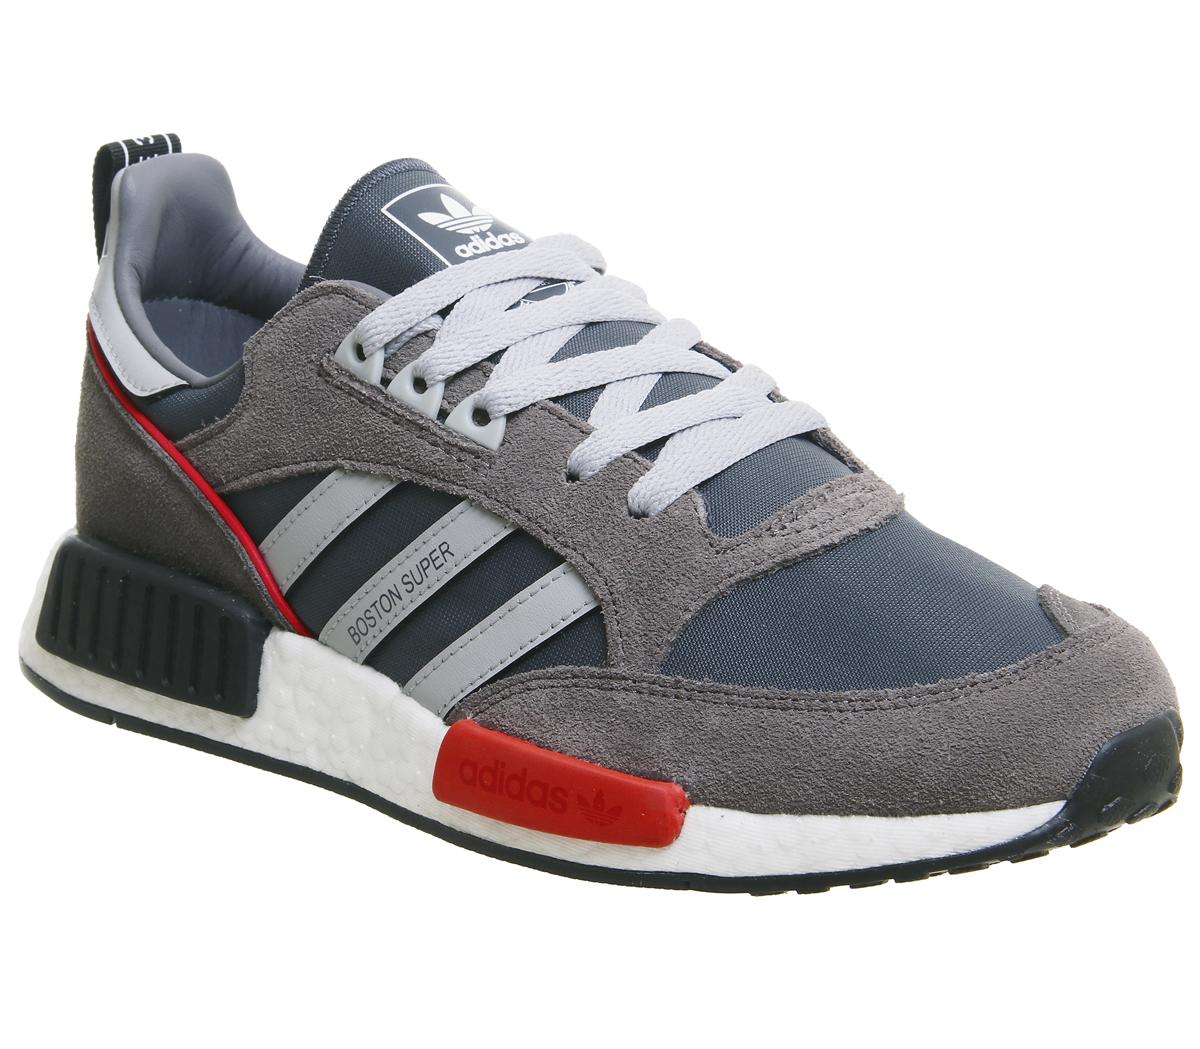 adidas Boston X R1 Trainers Bold Onix Clear Onix White - His trainers